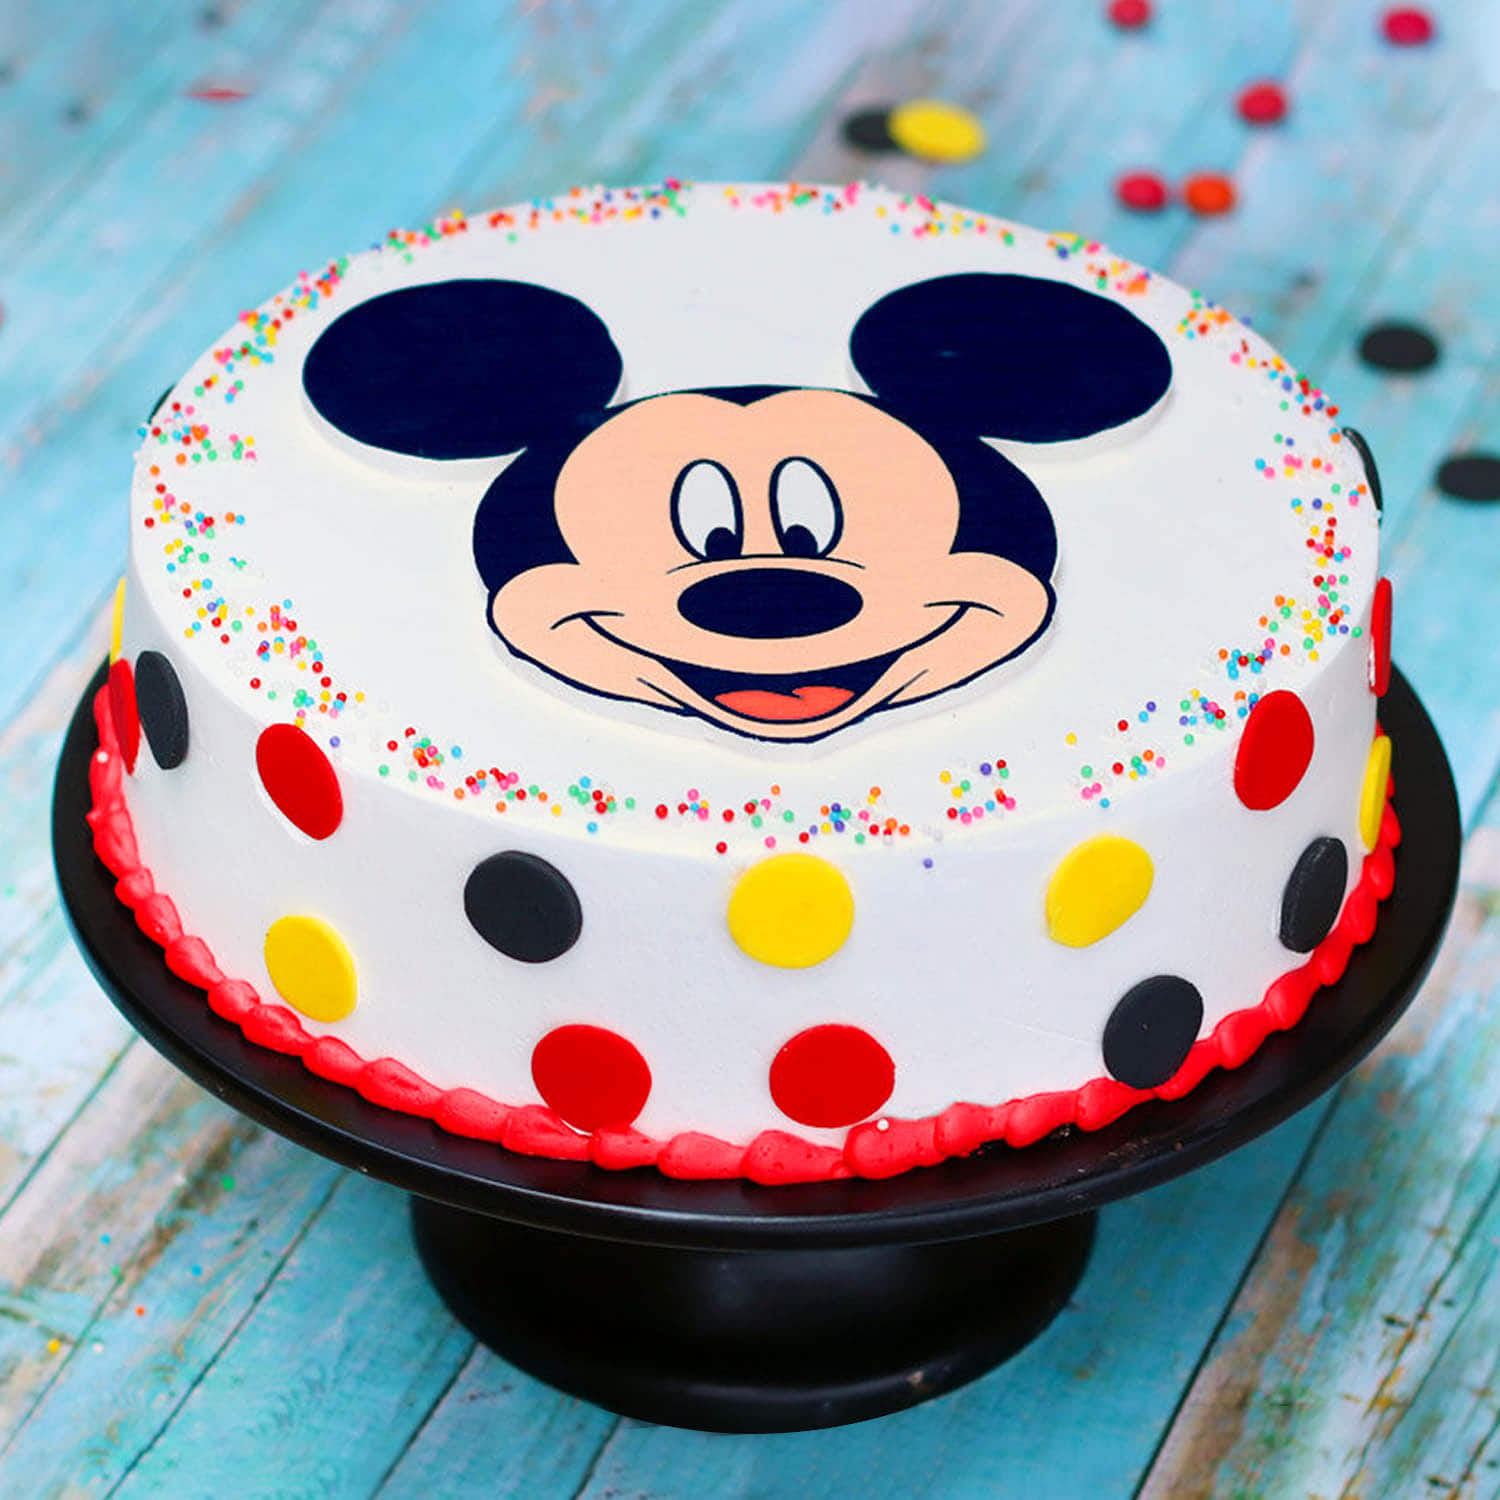 Buy Mickey Mouse Cake Online In India - Etsy India